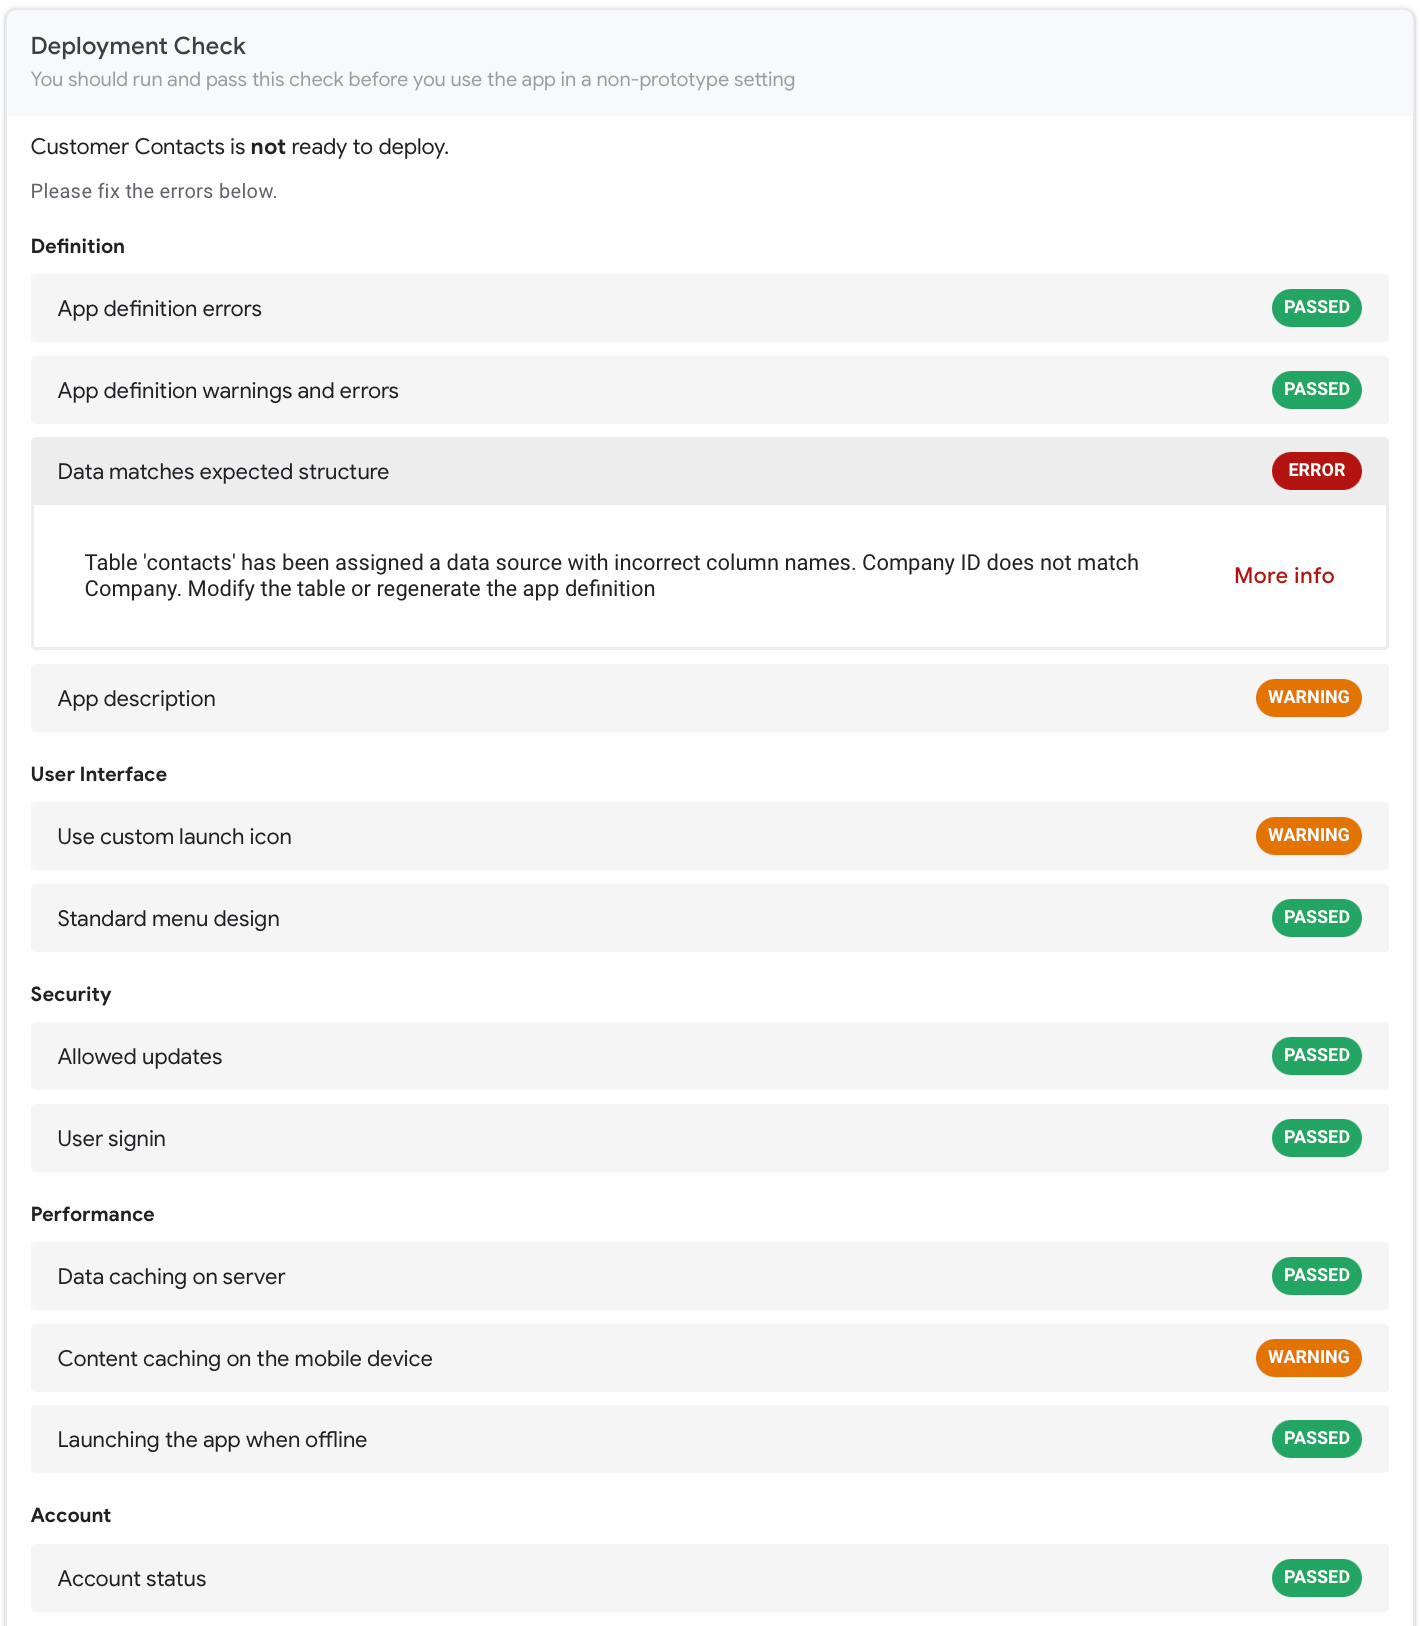 Deployment Check report listing several issues